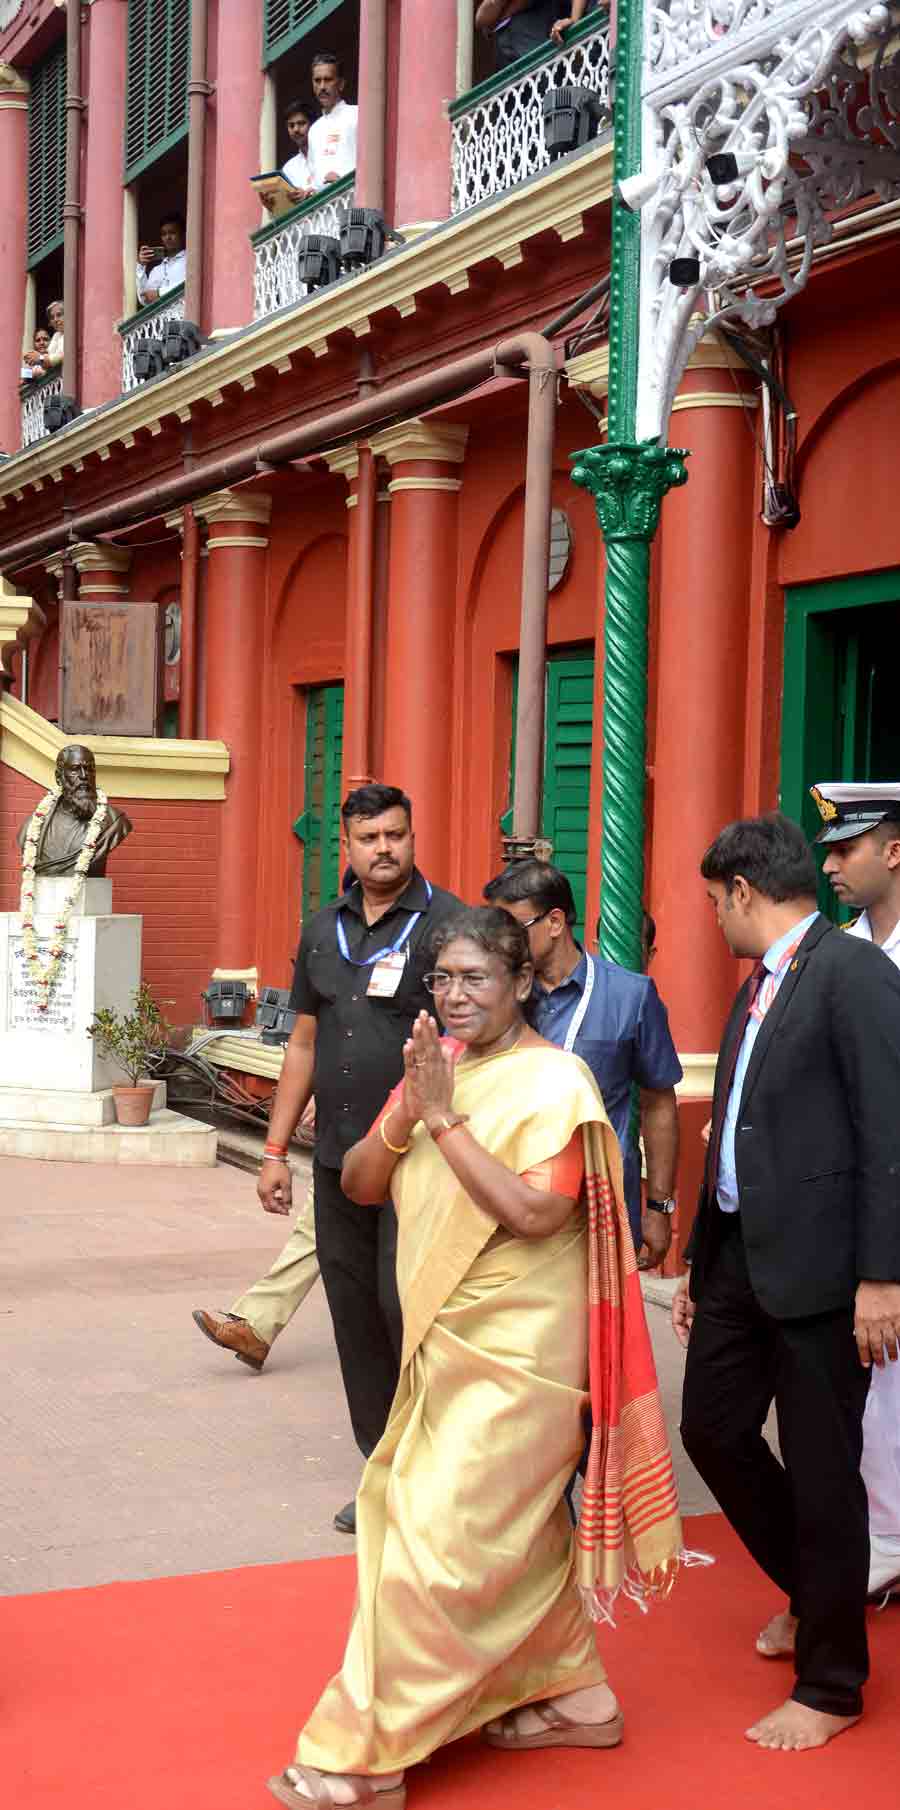 President Murmu at Jorasanko Thakurbari, the ancestral house of Nobel Laureate Rabindranath Tagore. President Murmu said she was deeply touched after visiting Tagore's ancestral house in north Kolkata. Murmu went around the rooms where Tagore was born, where he breathed his last and where he spent most of his time in and expressed awe over the preservation of the centuries-old structure, Registrar Subir Moitra of Rabindra Bharati University, which is housed on the premises, said. RBU authorities gave her four publications of Tagore and a photograph of his. Murmu, who was accompanied by Governor C V Ananda Bose, was greeted at the Jorasanko Thakurbari by state ministers Bratya Basu and Sashi Panja